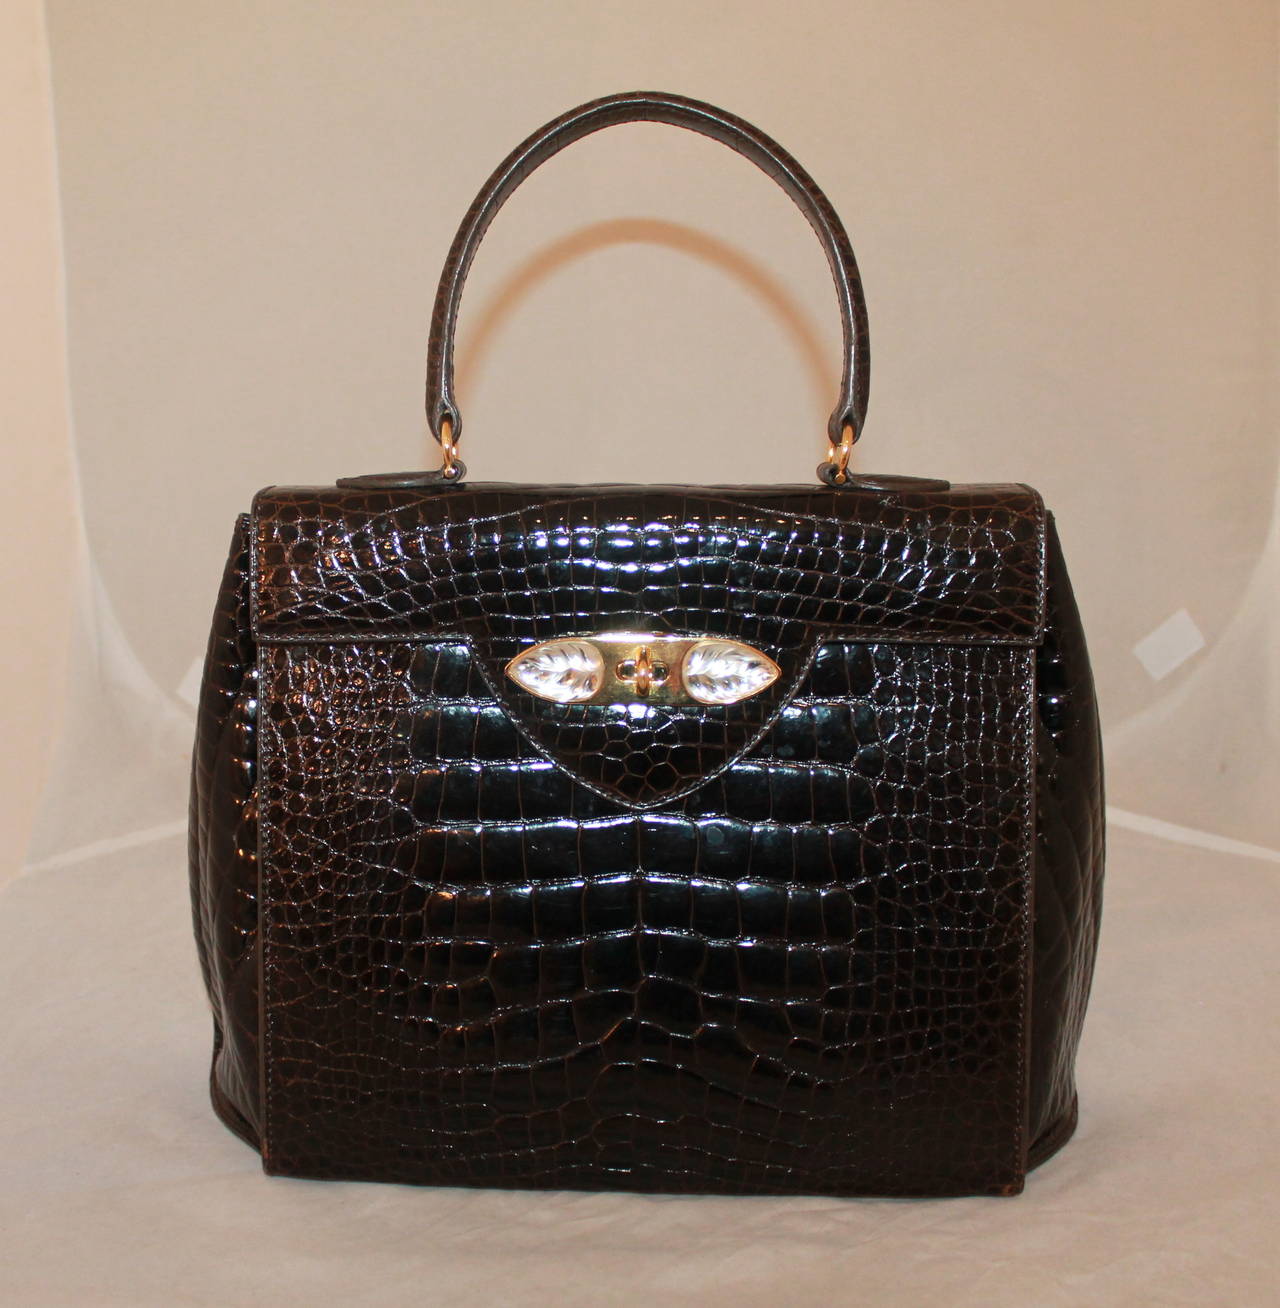 Lalique 1990's Chocolate Brown Croc Handbag with Lucite Detail - GHW. This bag is in very good condition with nearly no wear. It is a truly unique piece.

Measurements:
Length- 9.25"
Width- 13"
Depth- 4"
Handle Drop- 5"